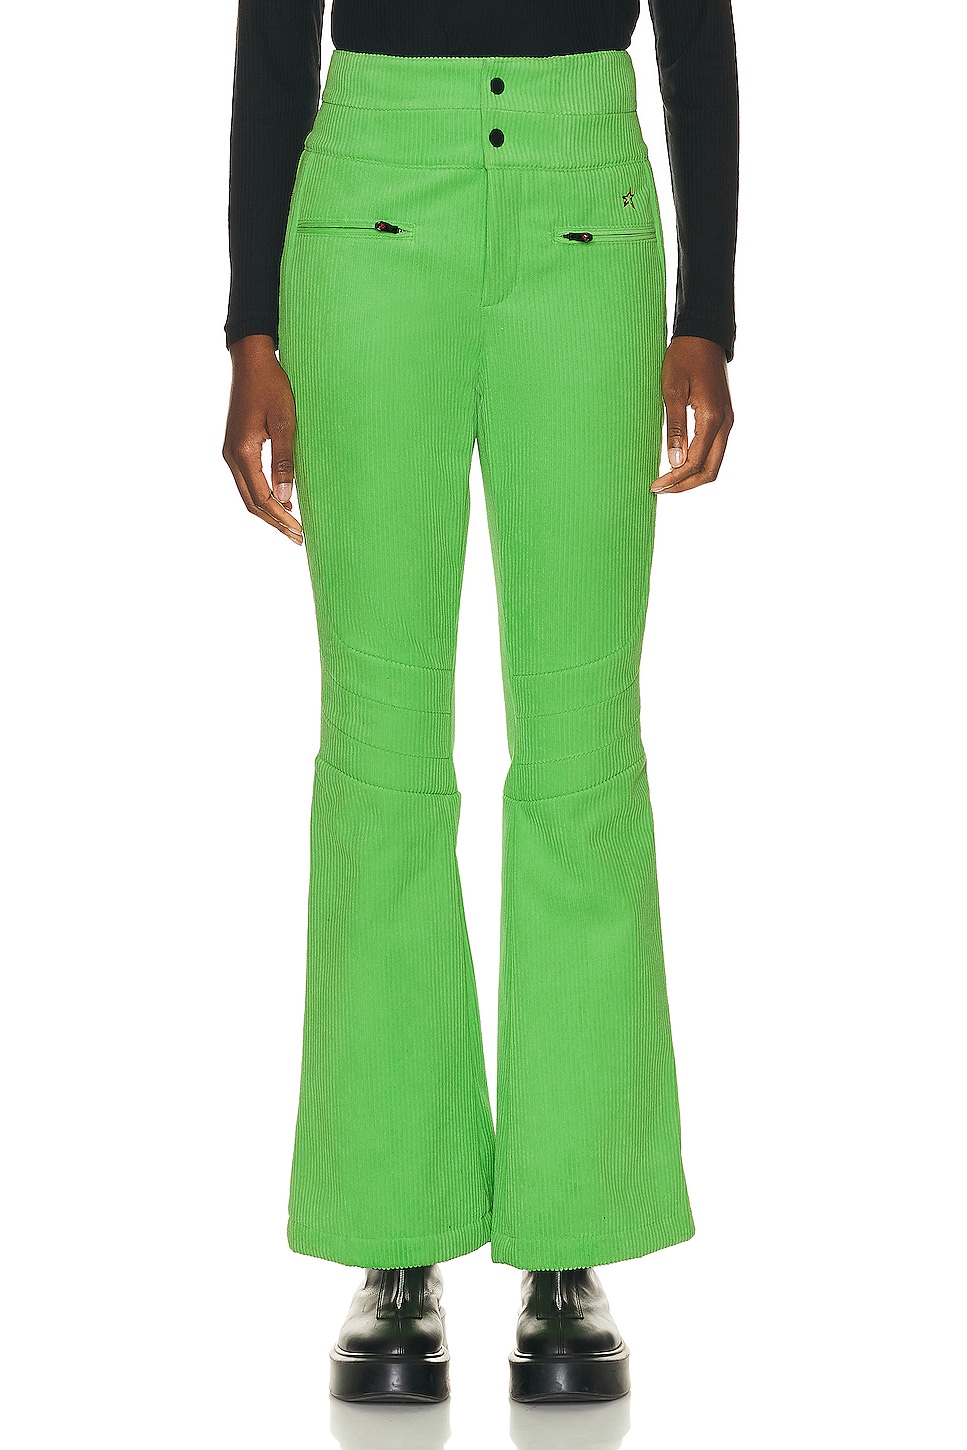 Image 1 of Perfect Moment Aurora Flare Pant in Pear Green